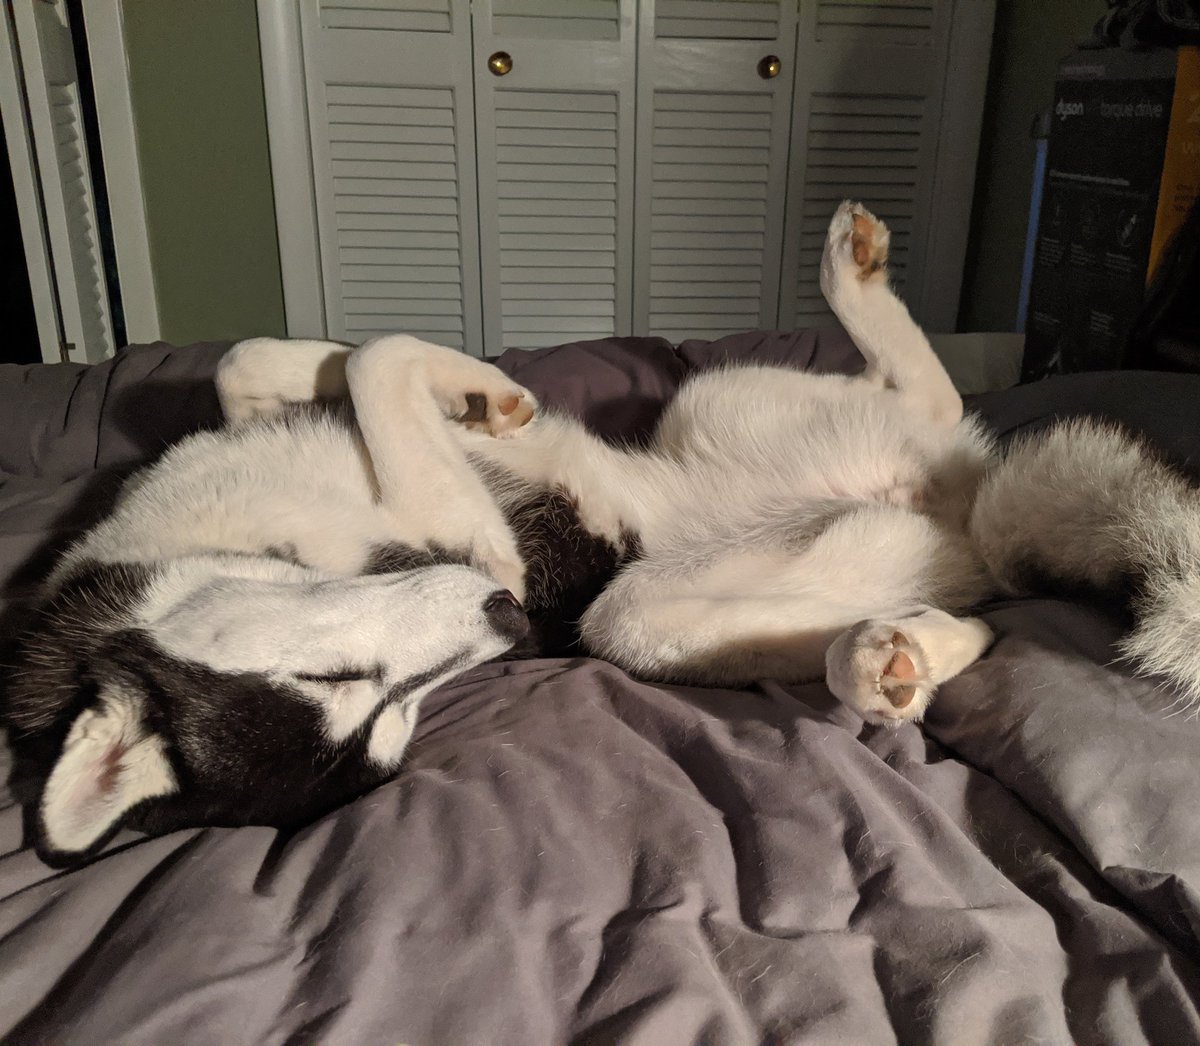 She is resting in preparation for this massive winter storm they keep saying is coming.... #winterstormisaiah 
.
.
#gonetothesnowdogs #husky #siberianhusky #nap #sleepingdog #sleepydogs